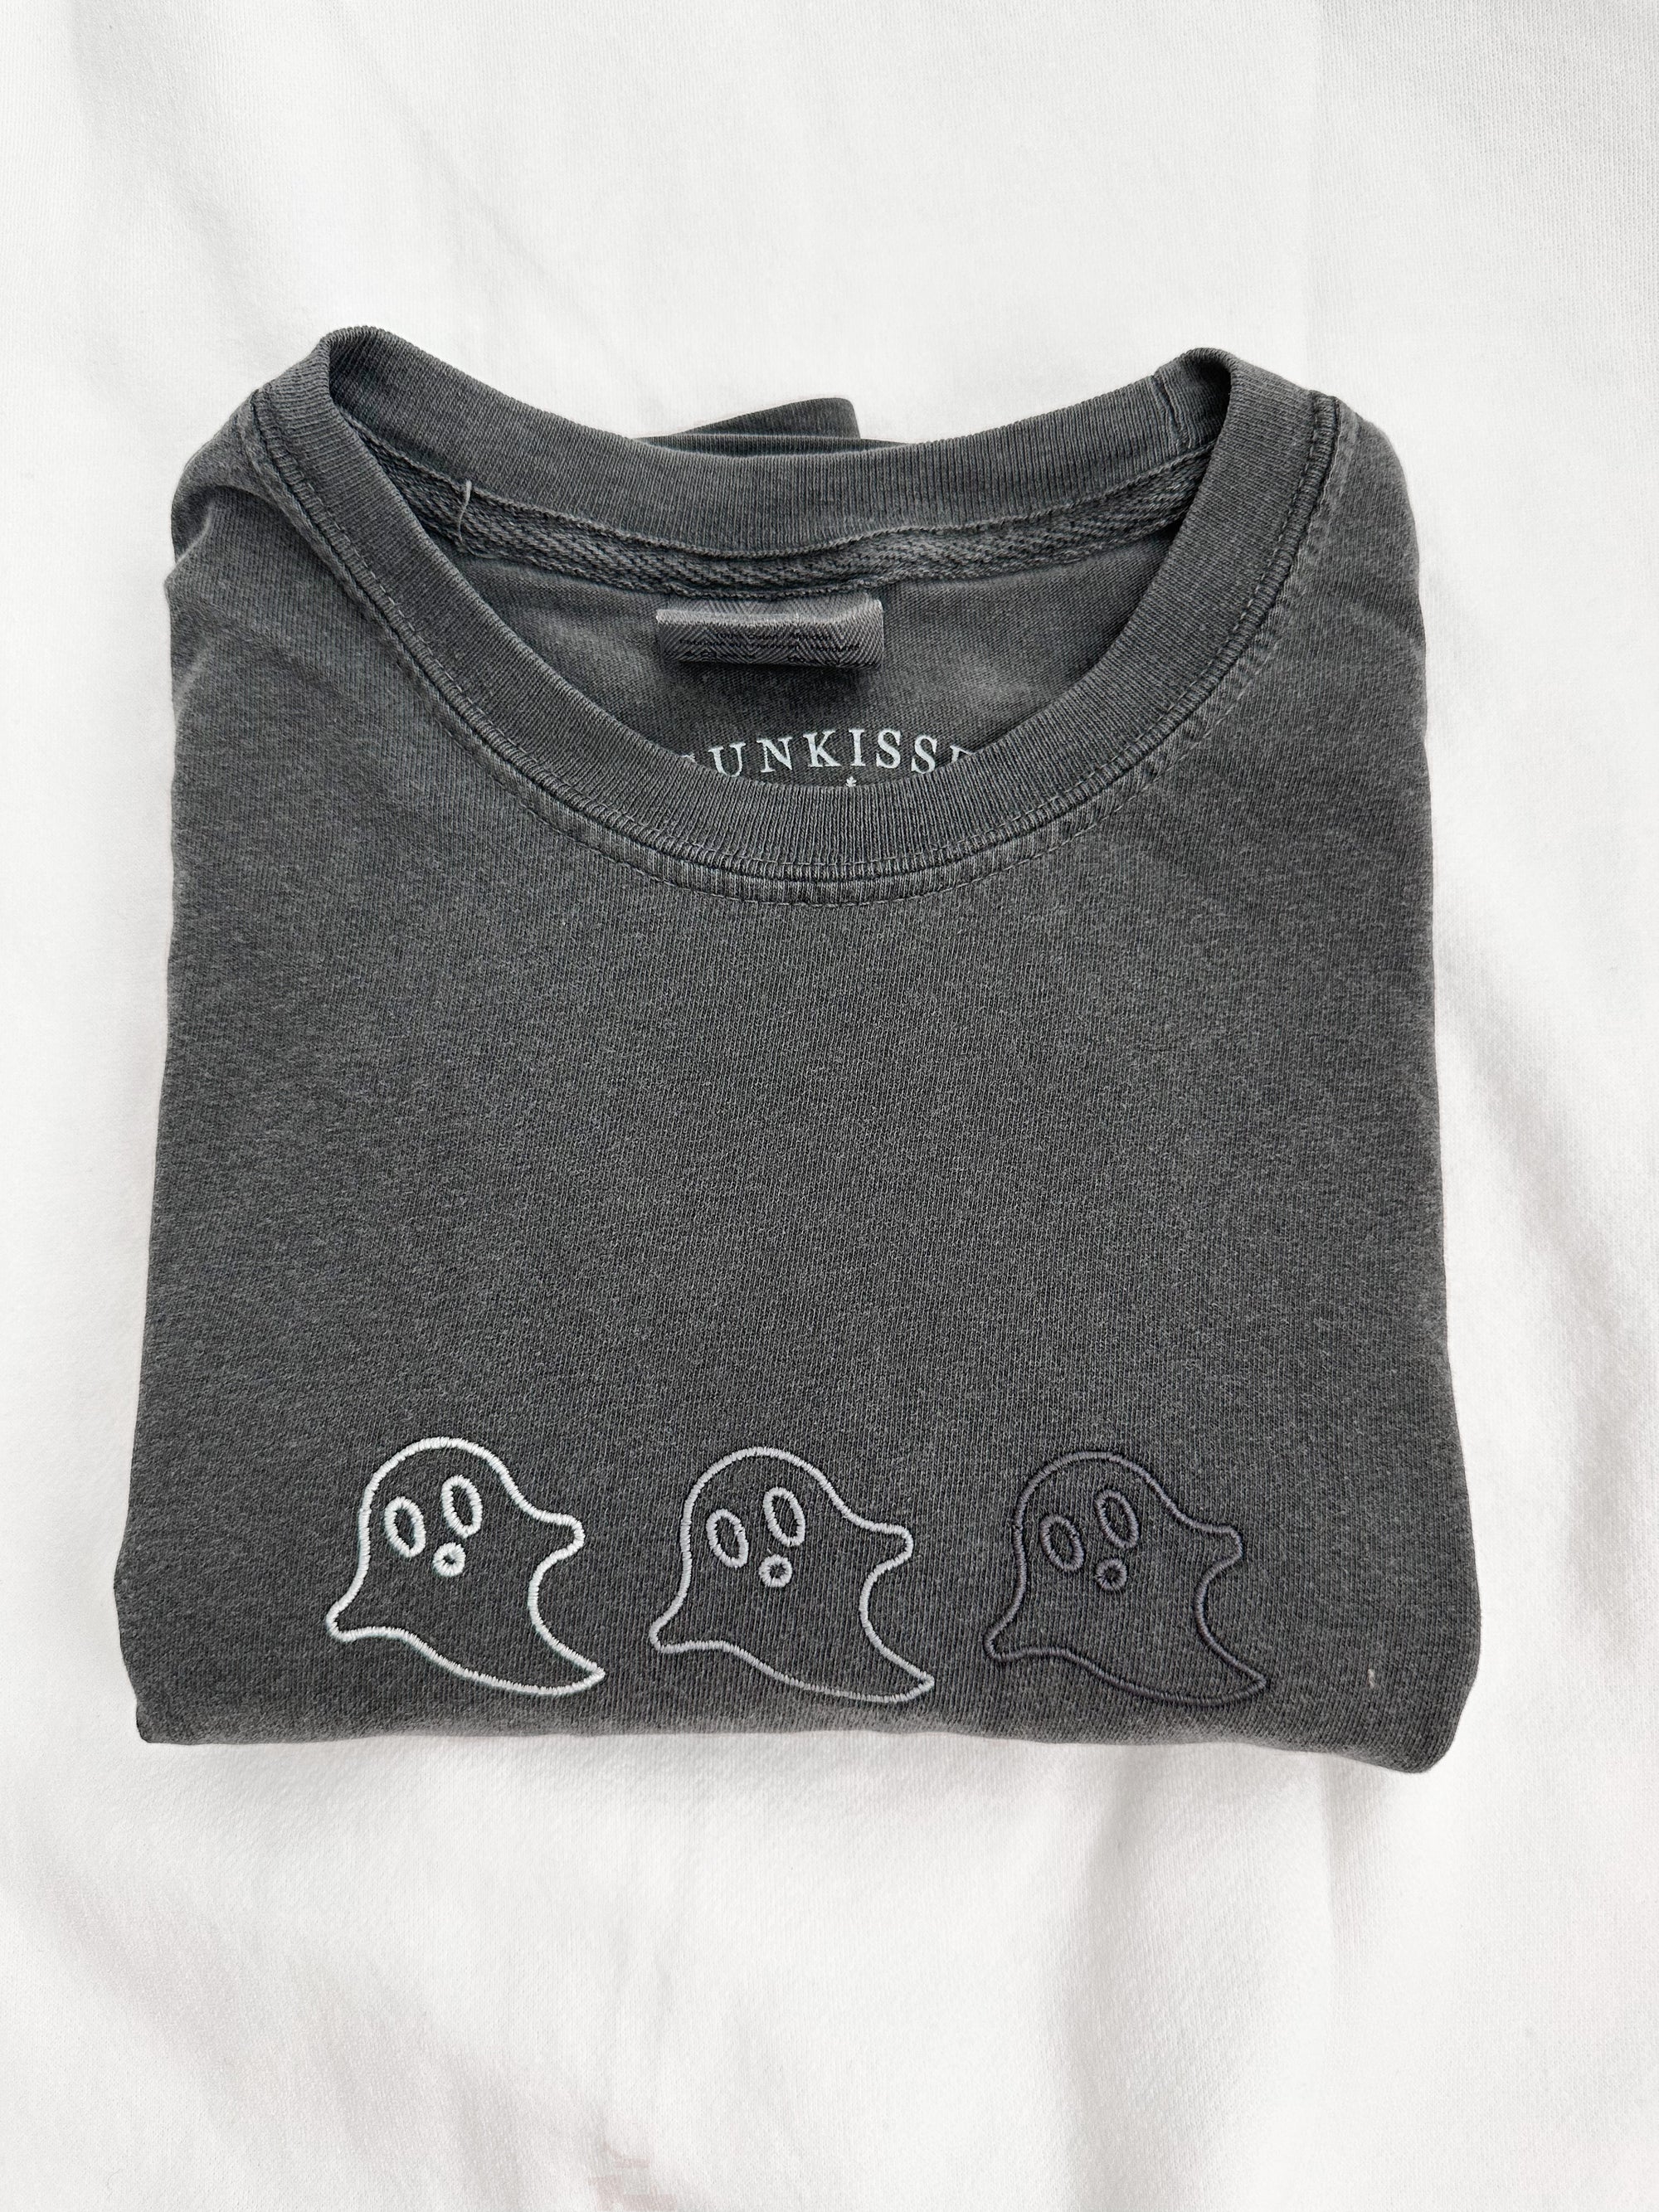 3 GHOST EMBROIDER TEE